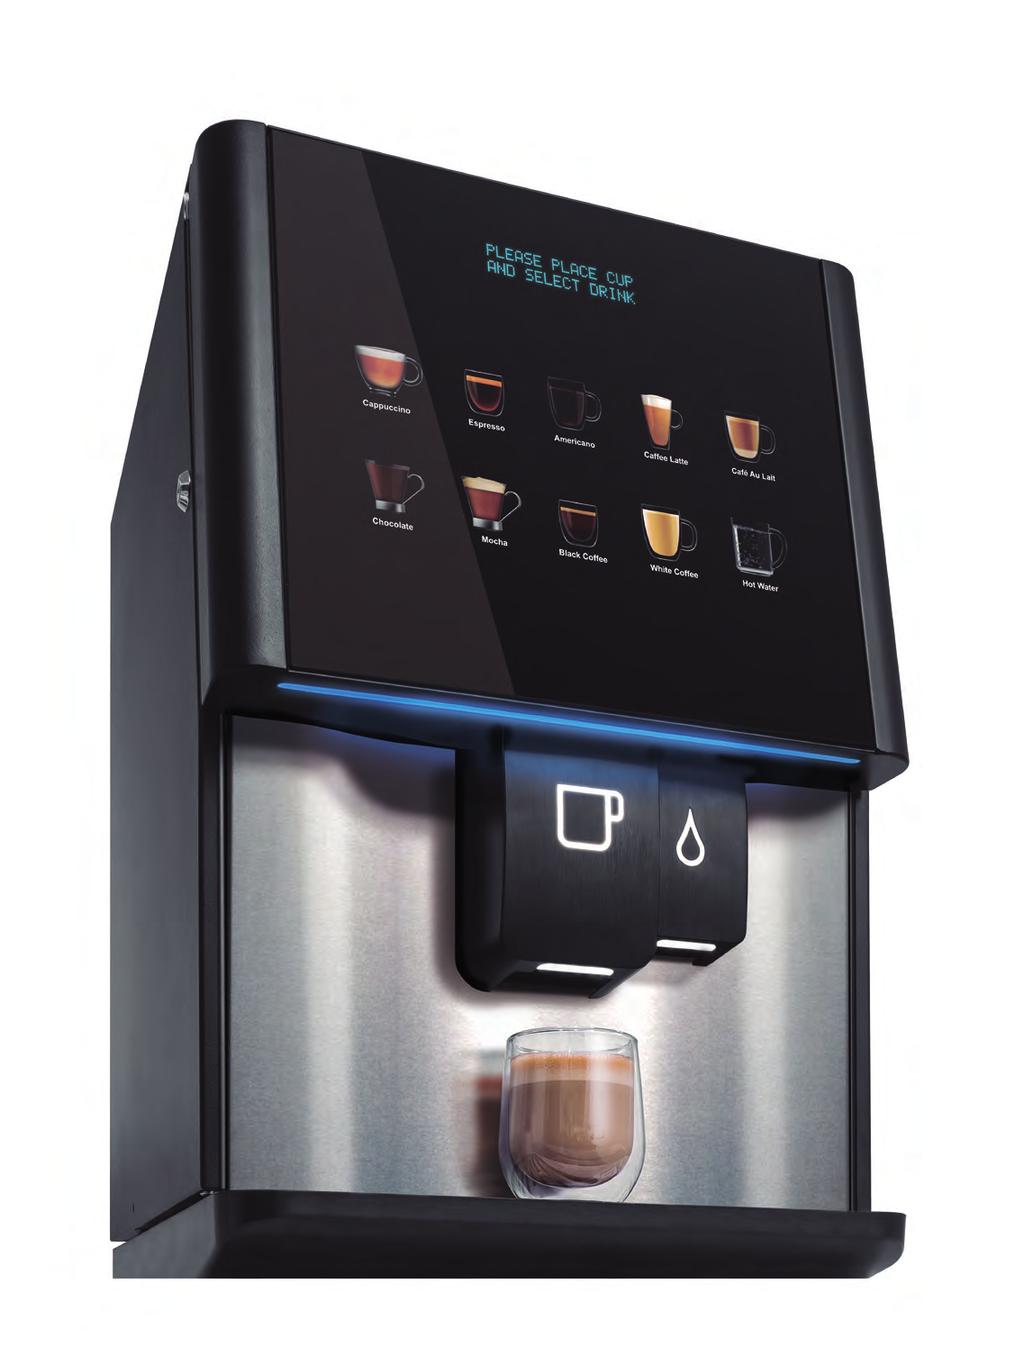 THE ULTIMATE EXPERIENCE Vitro s smoked glass door and touch screen user interface elegantly displays a comprehensive menu.